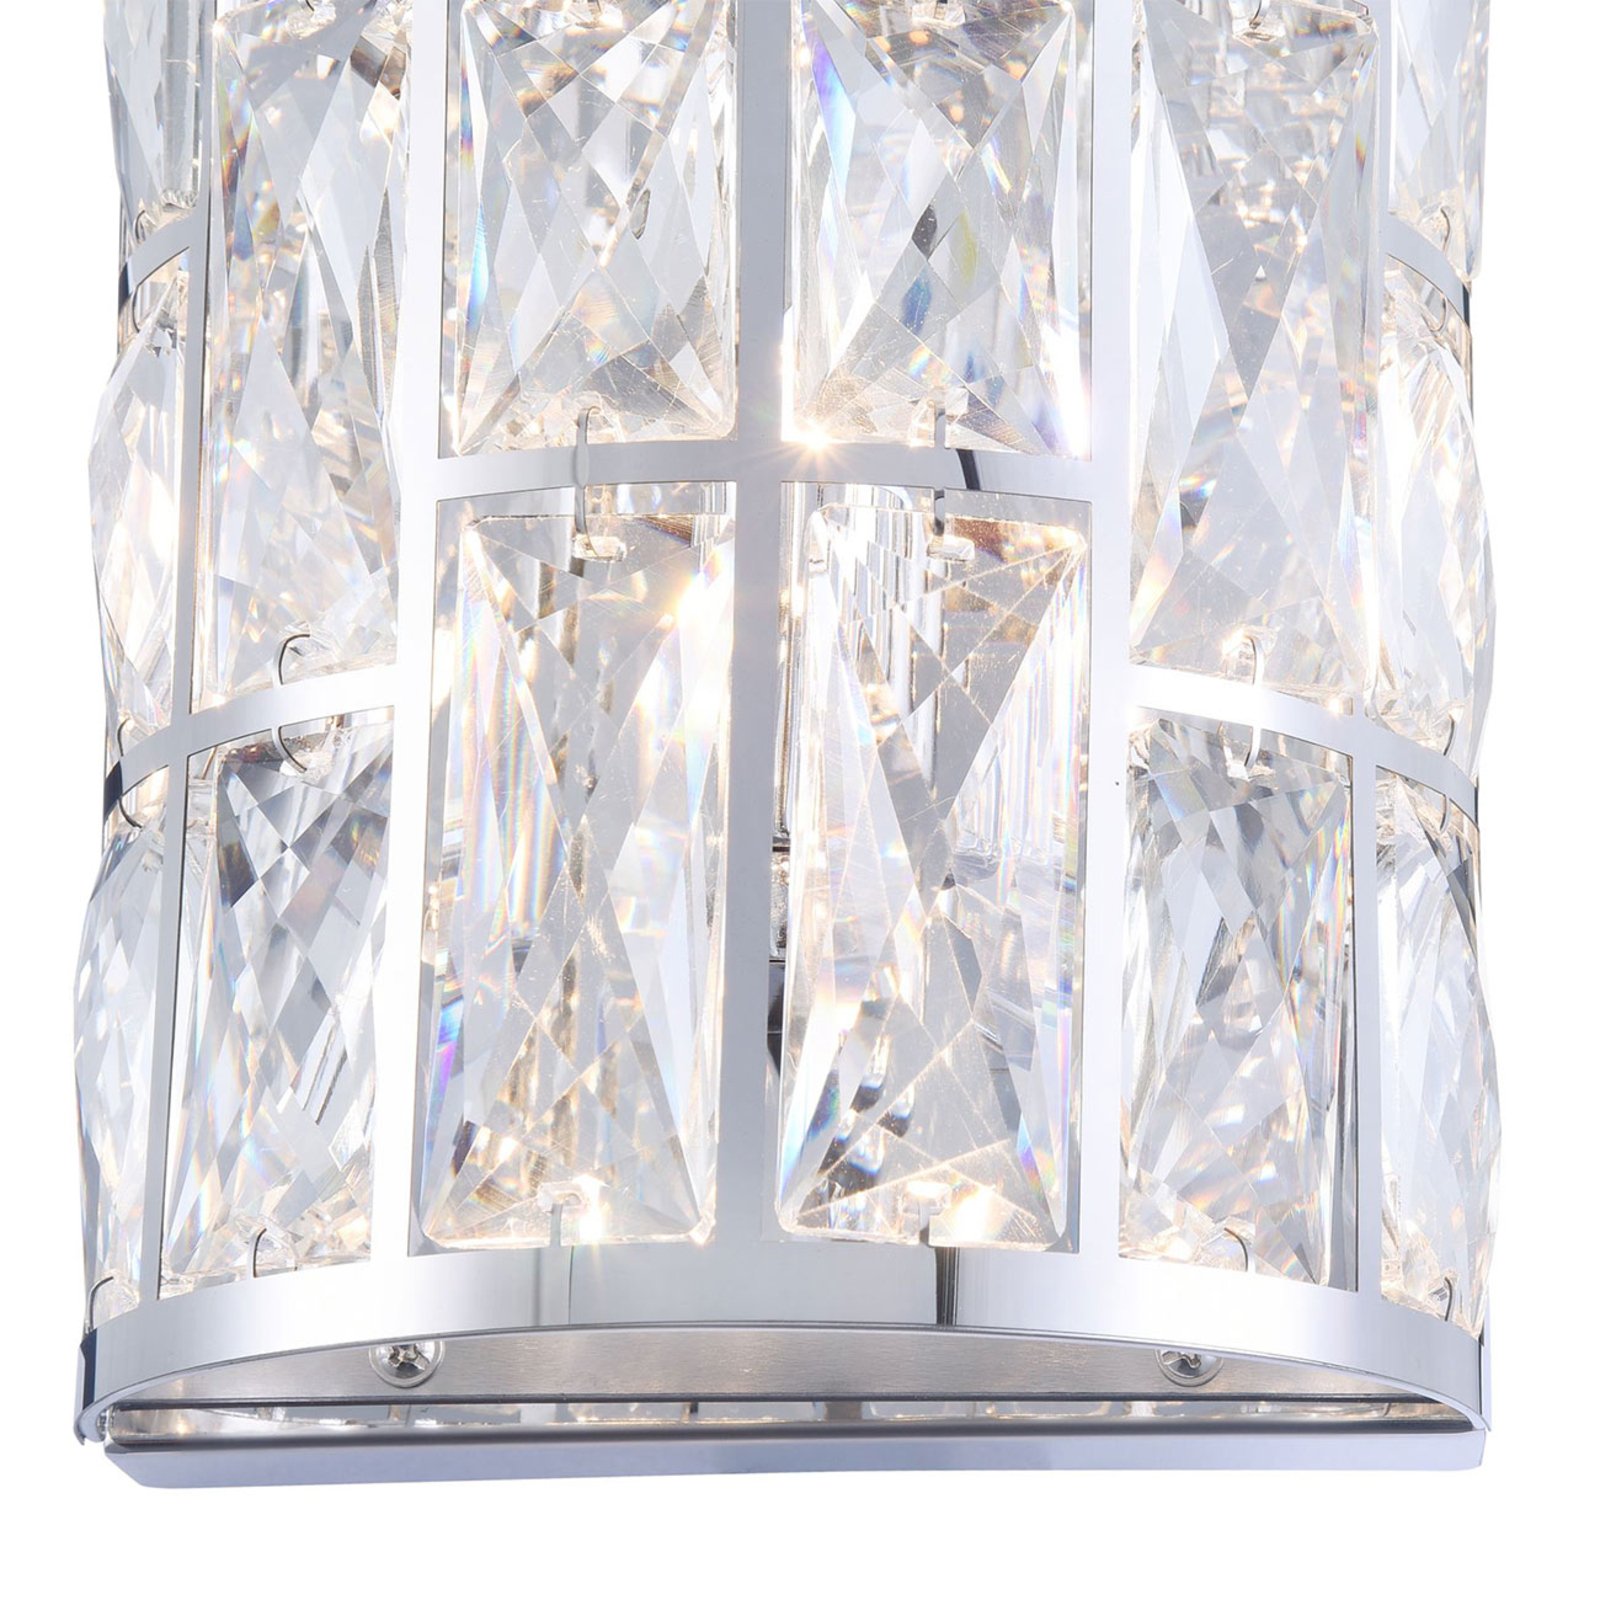 Gelid wall light with crystal glass discs